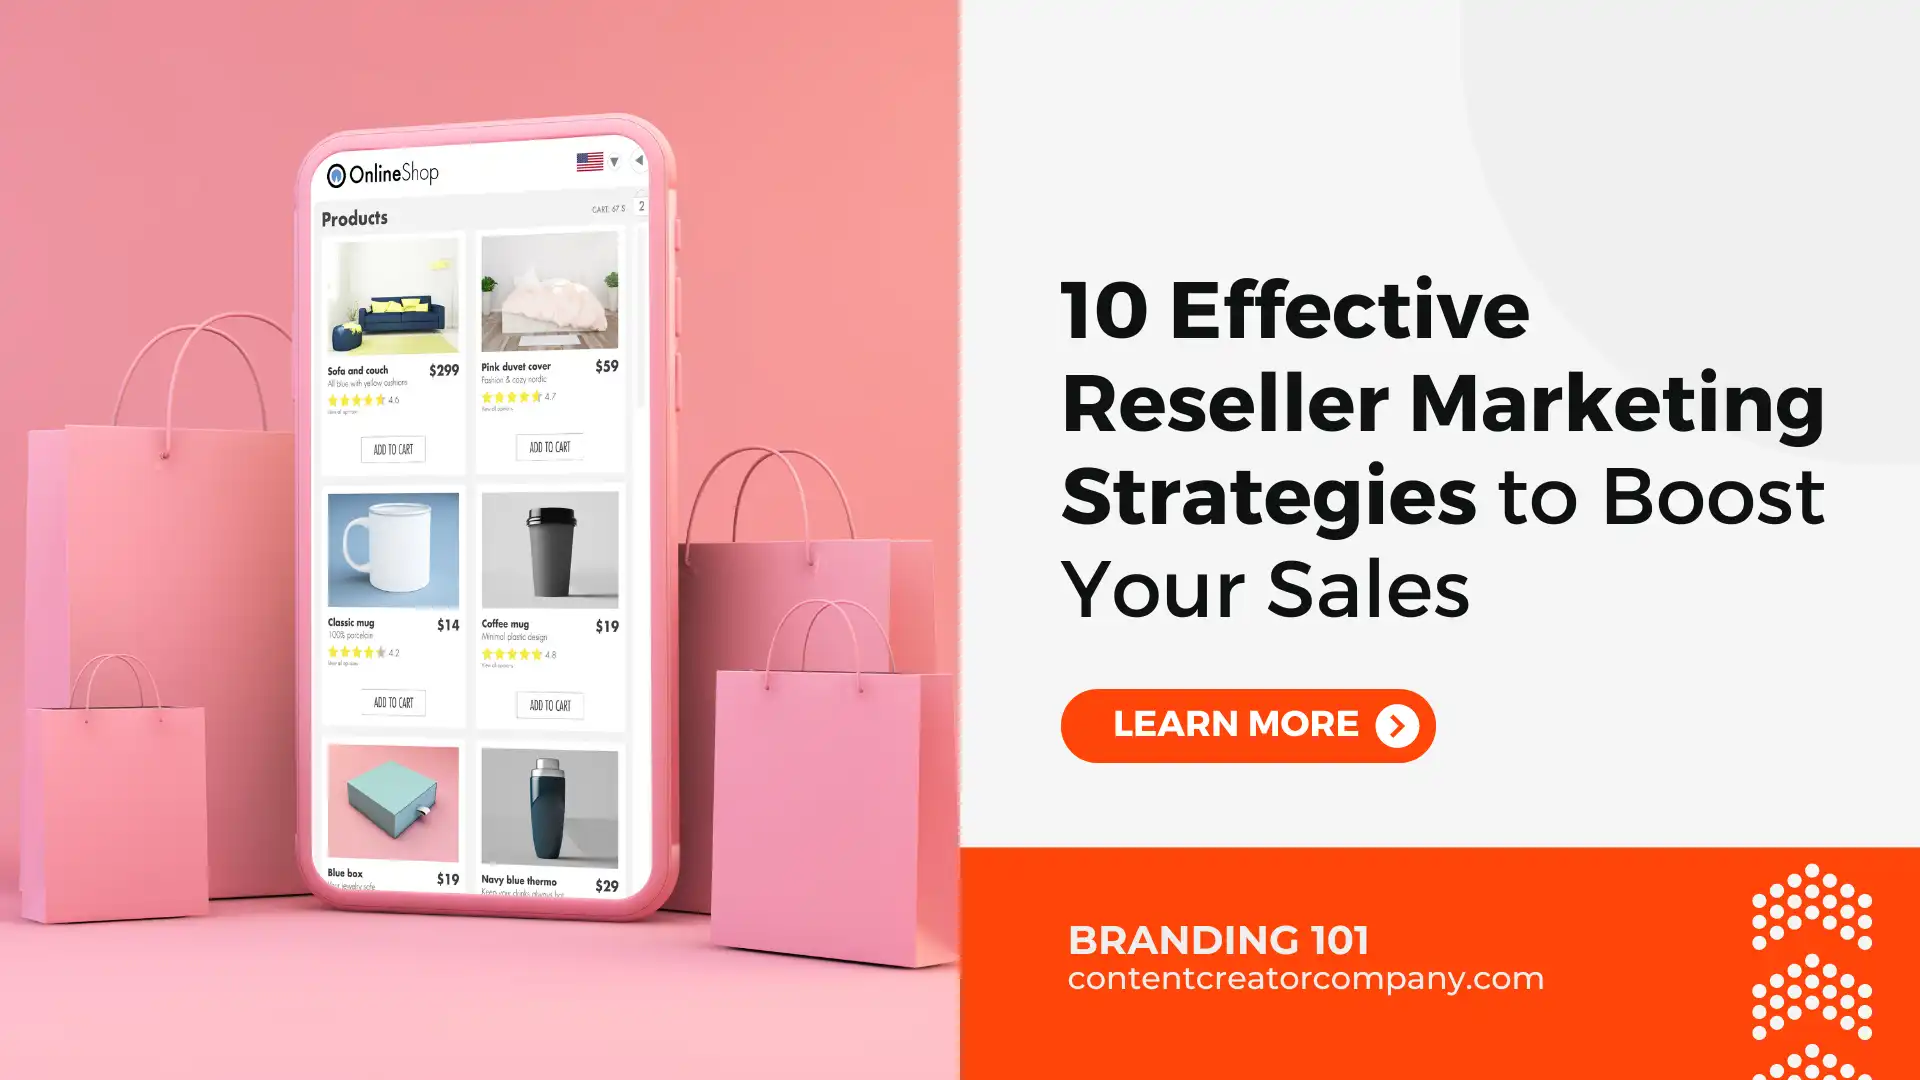 10 Effective Reseller Marketing Strategies to Boost Your Sales